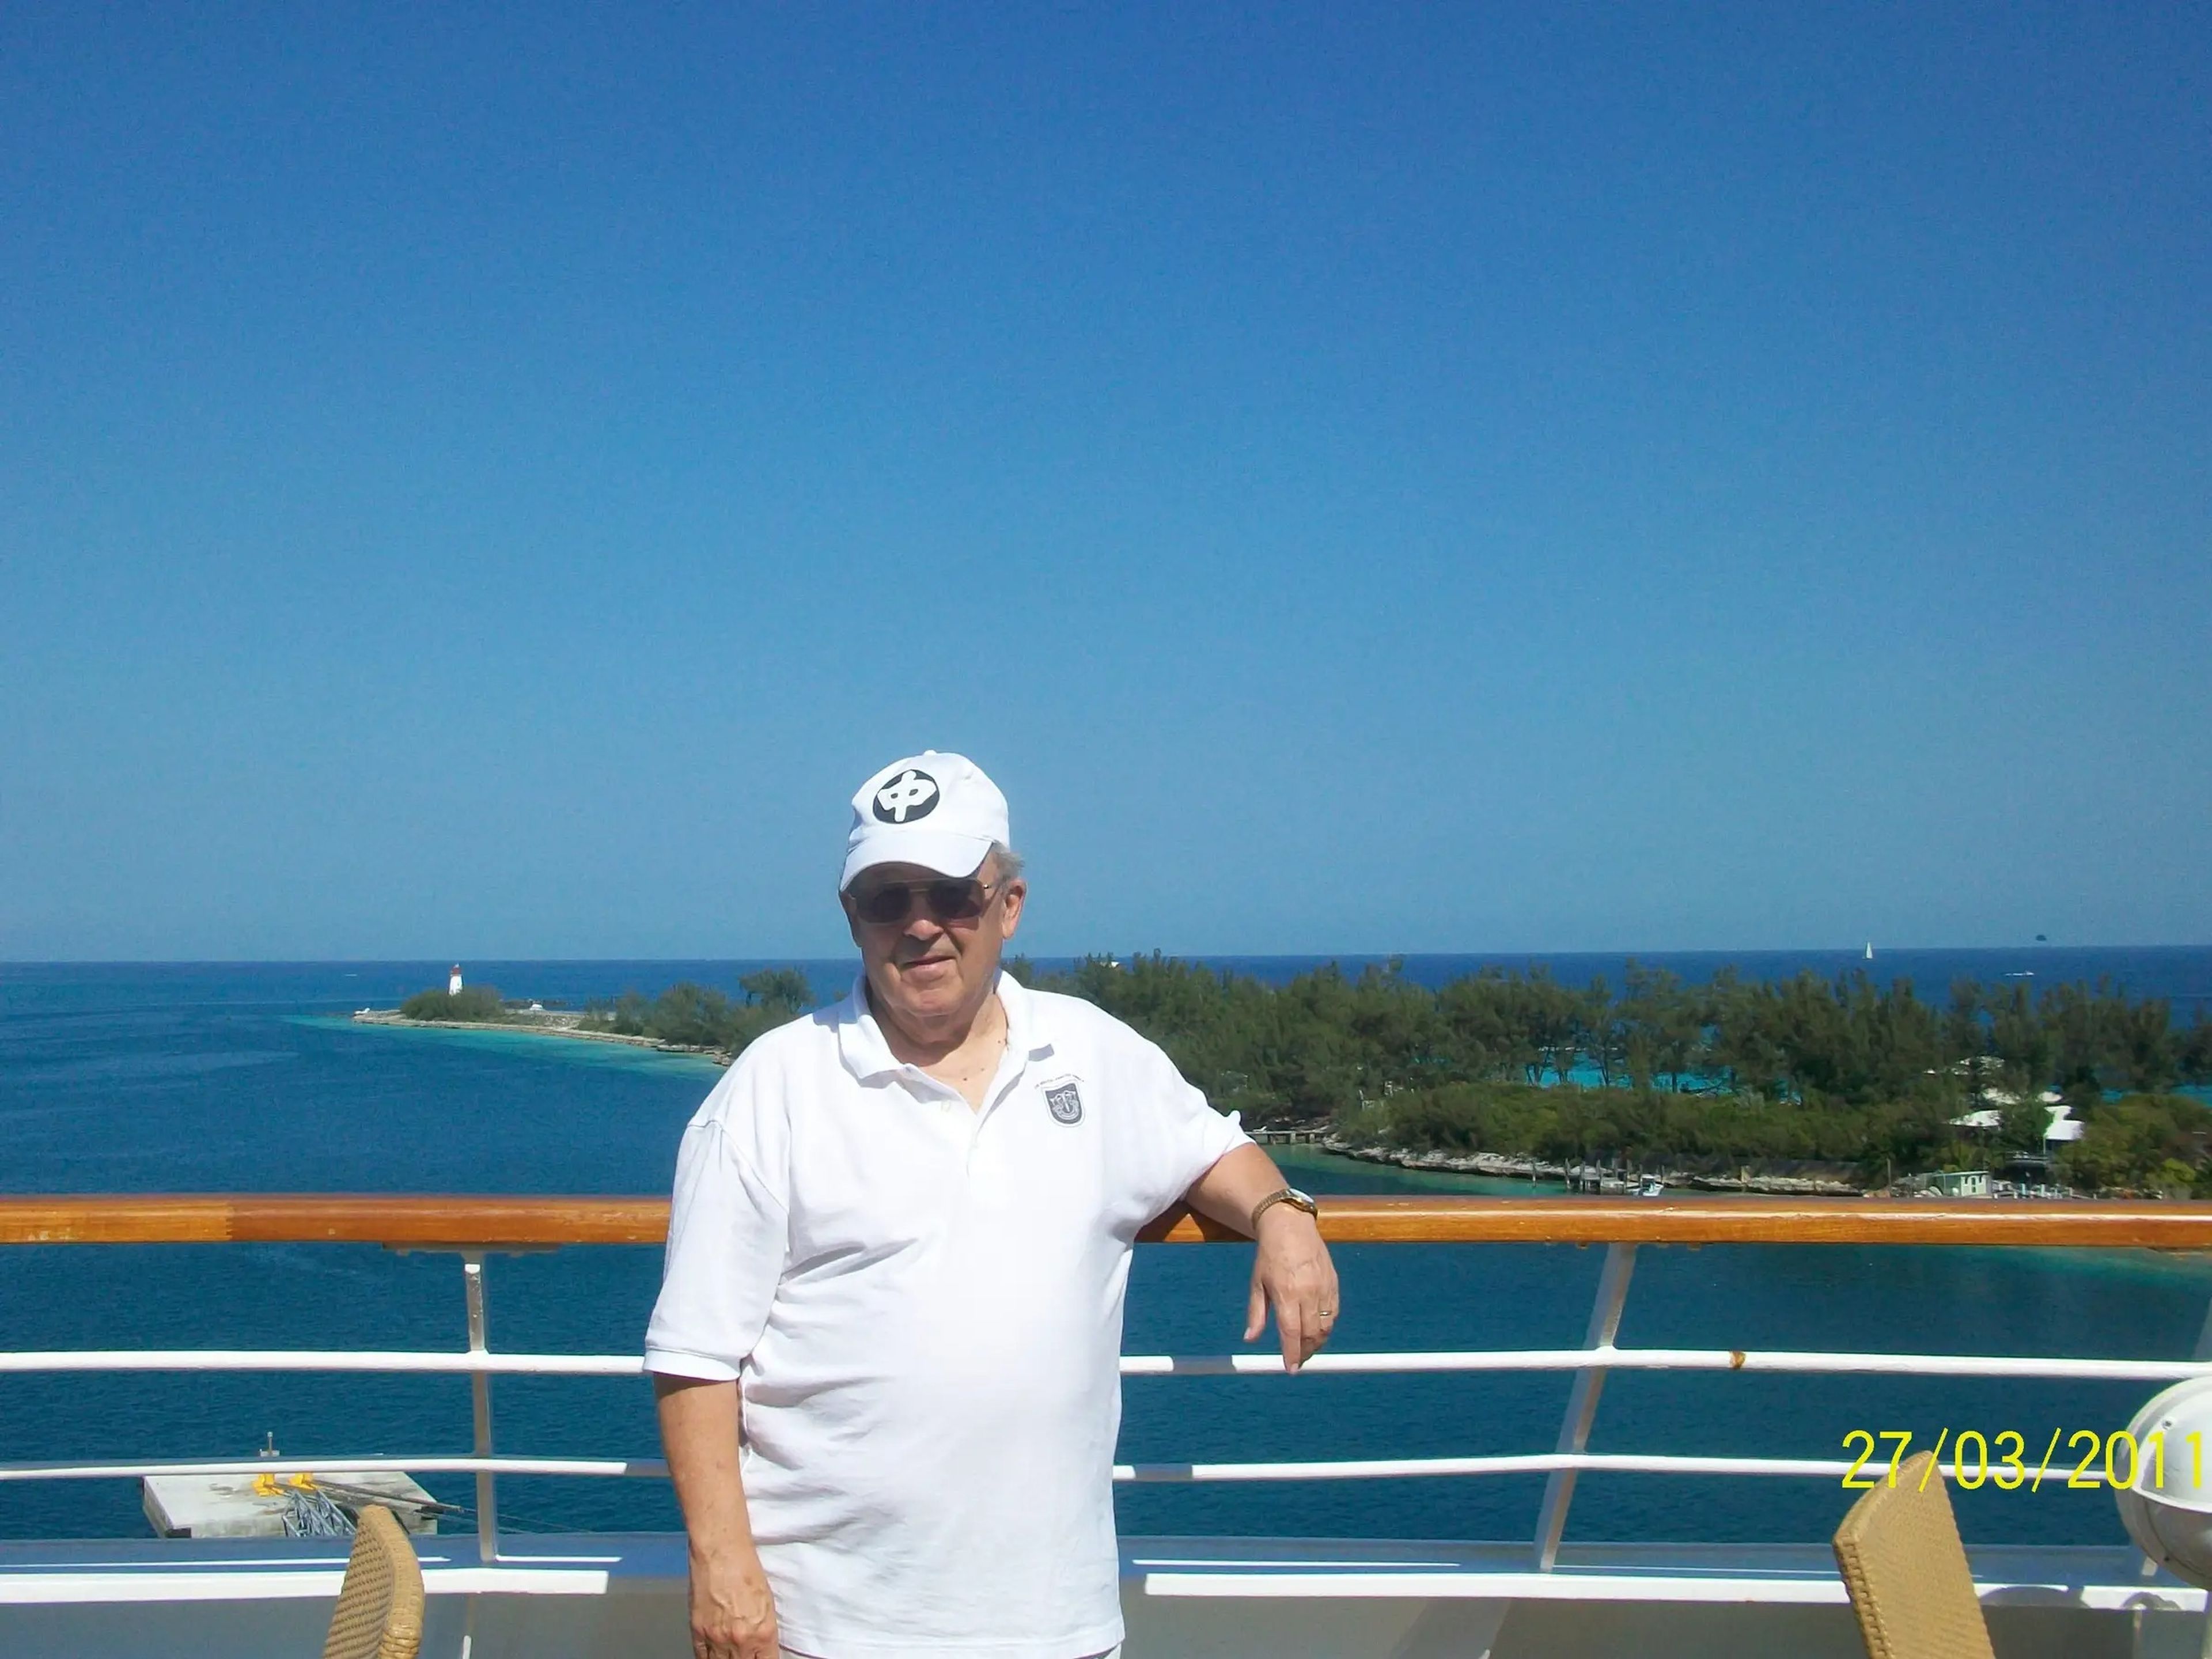 robert l willett posing for a photo on the deck of a cruise ship in front of blu skies